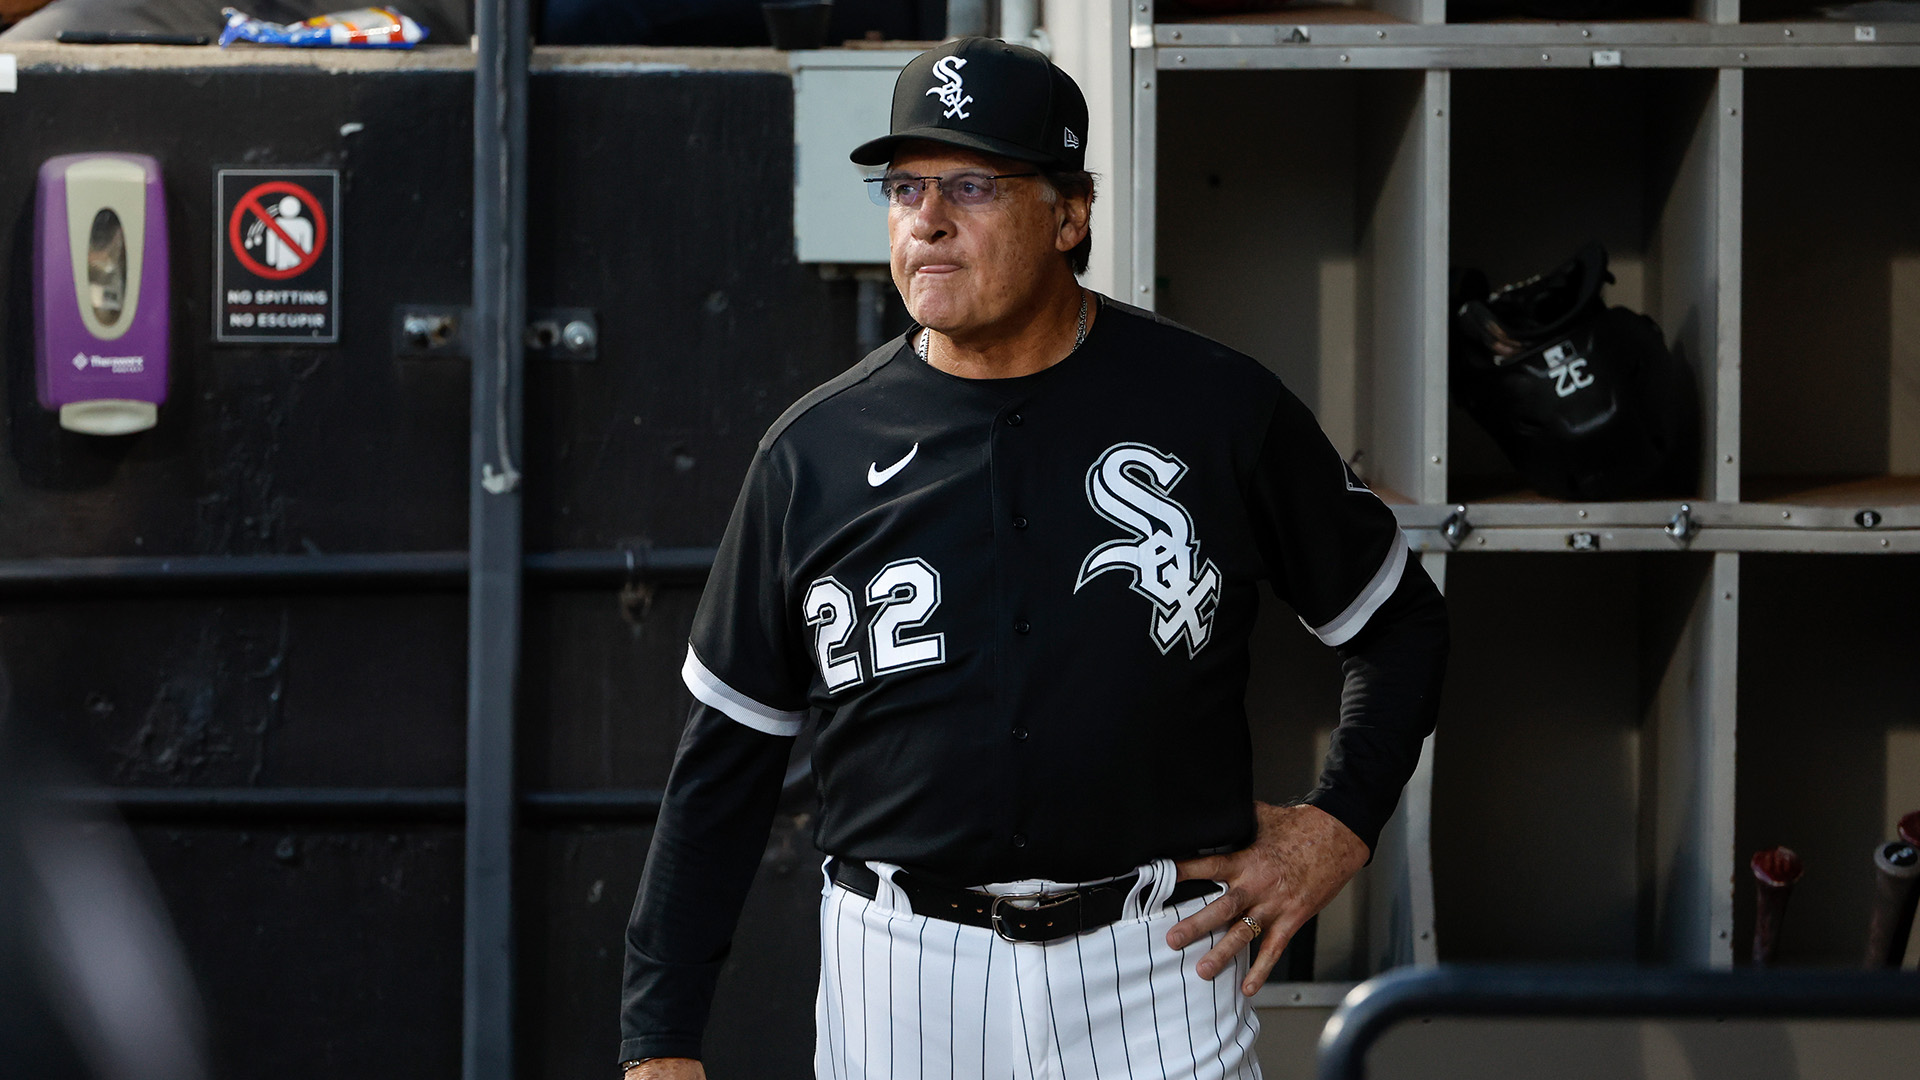 Tony La Russa returns to good health, returns to White Sox picture -  Chicago Sun-Times